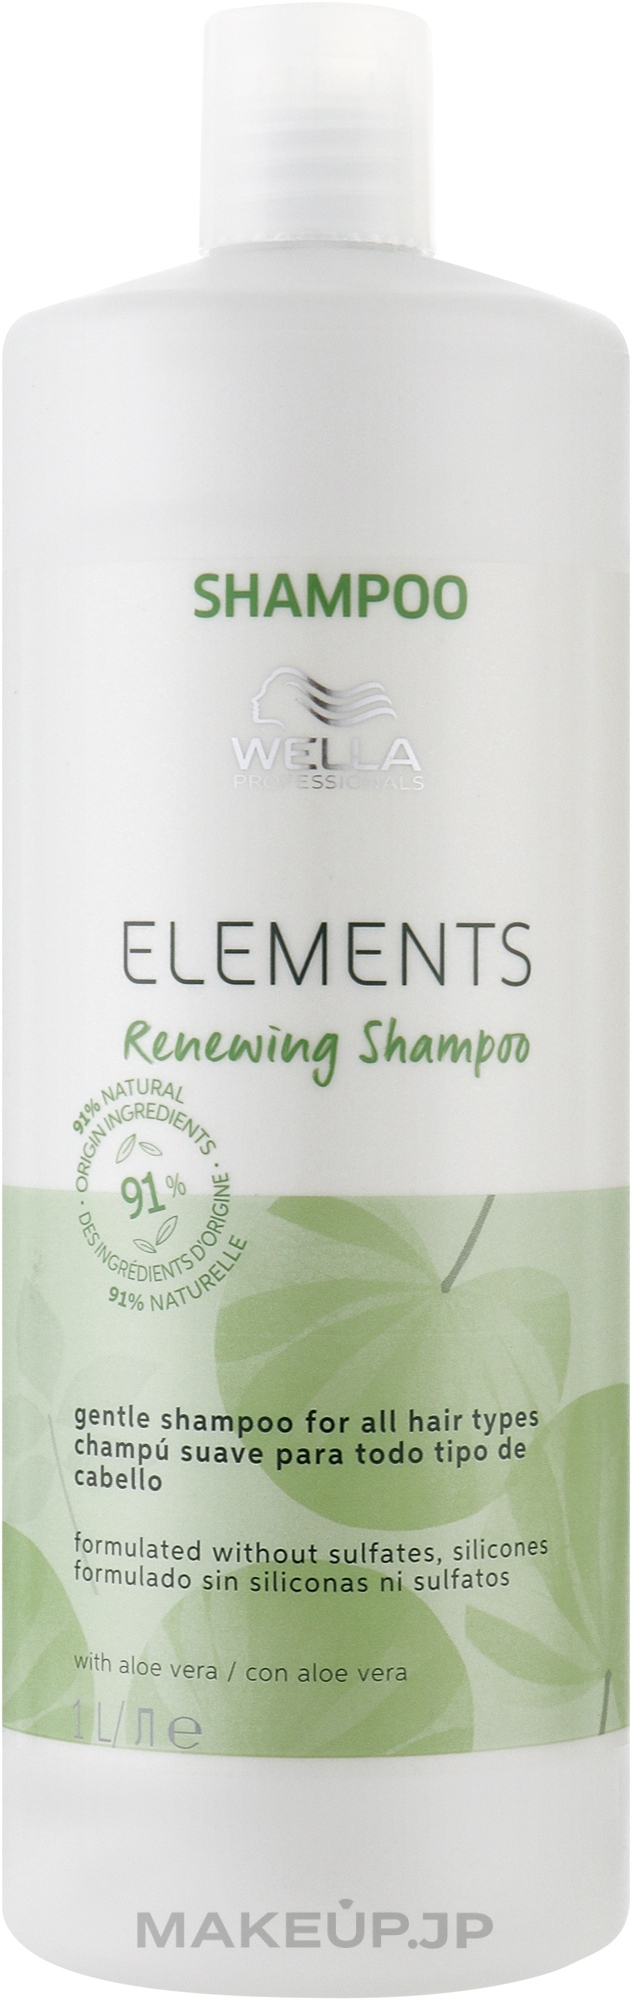 Renewing Gentle Shampoo for All Hair Types - Wella Professionals Elements Renewing Shampoo Gentle Shampoo For All Hair Types — photo 1000 ml